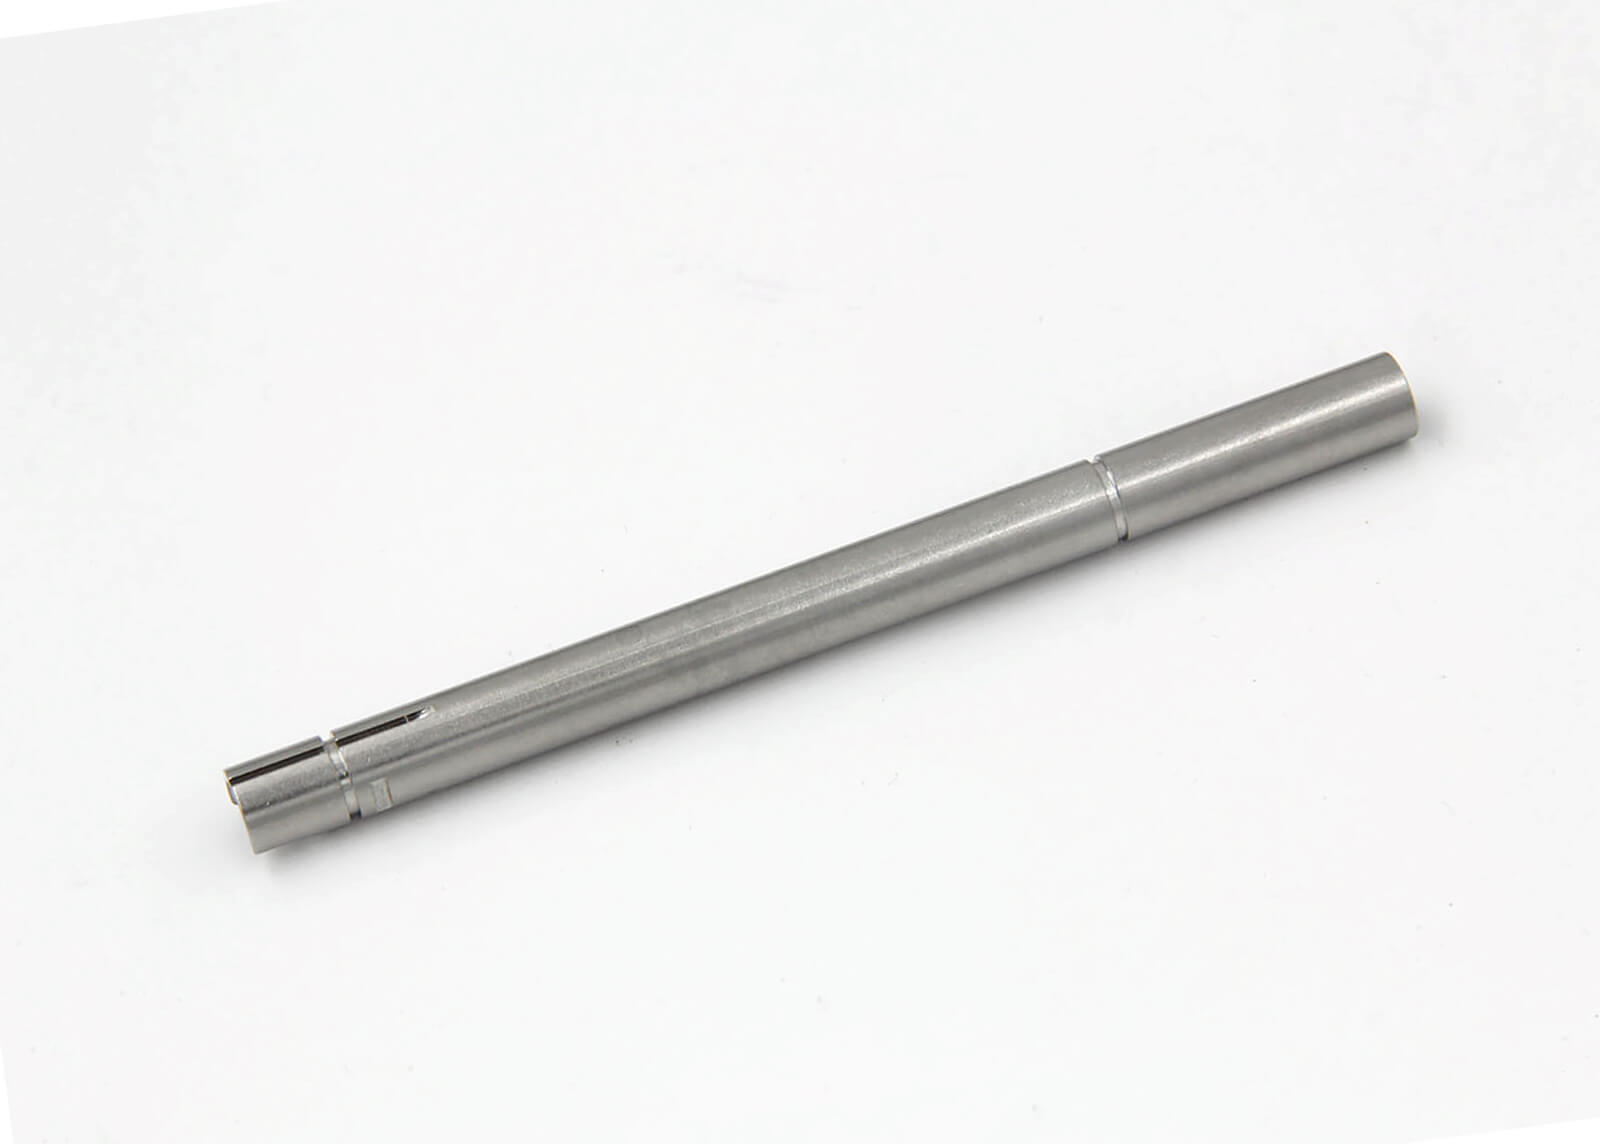 Stainless Steel 6.03mm Precision GBB Inner Barrel 115mm - Modify Airsoft Parts